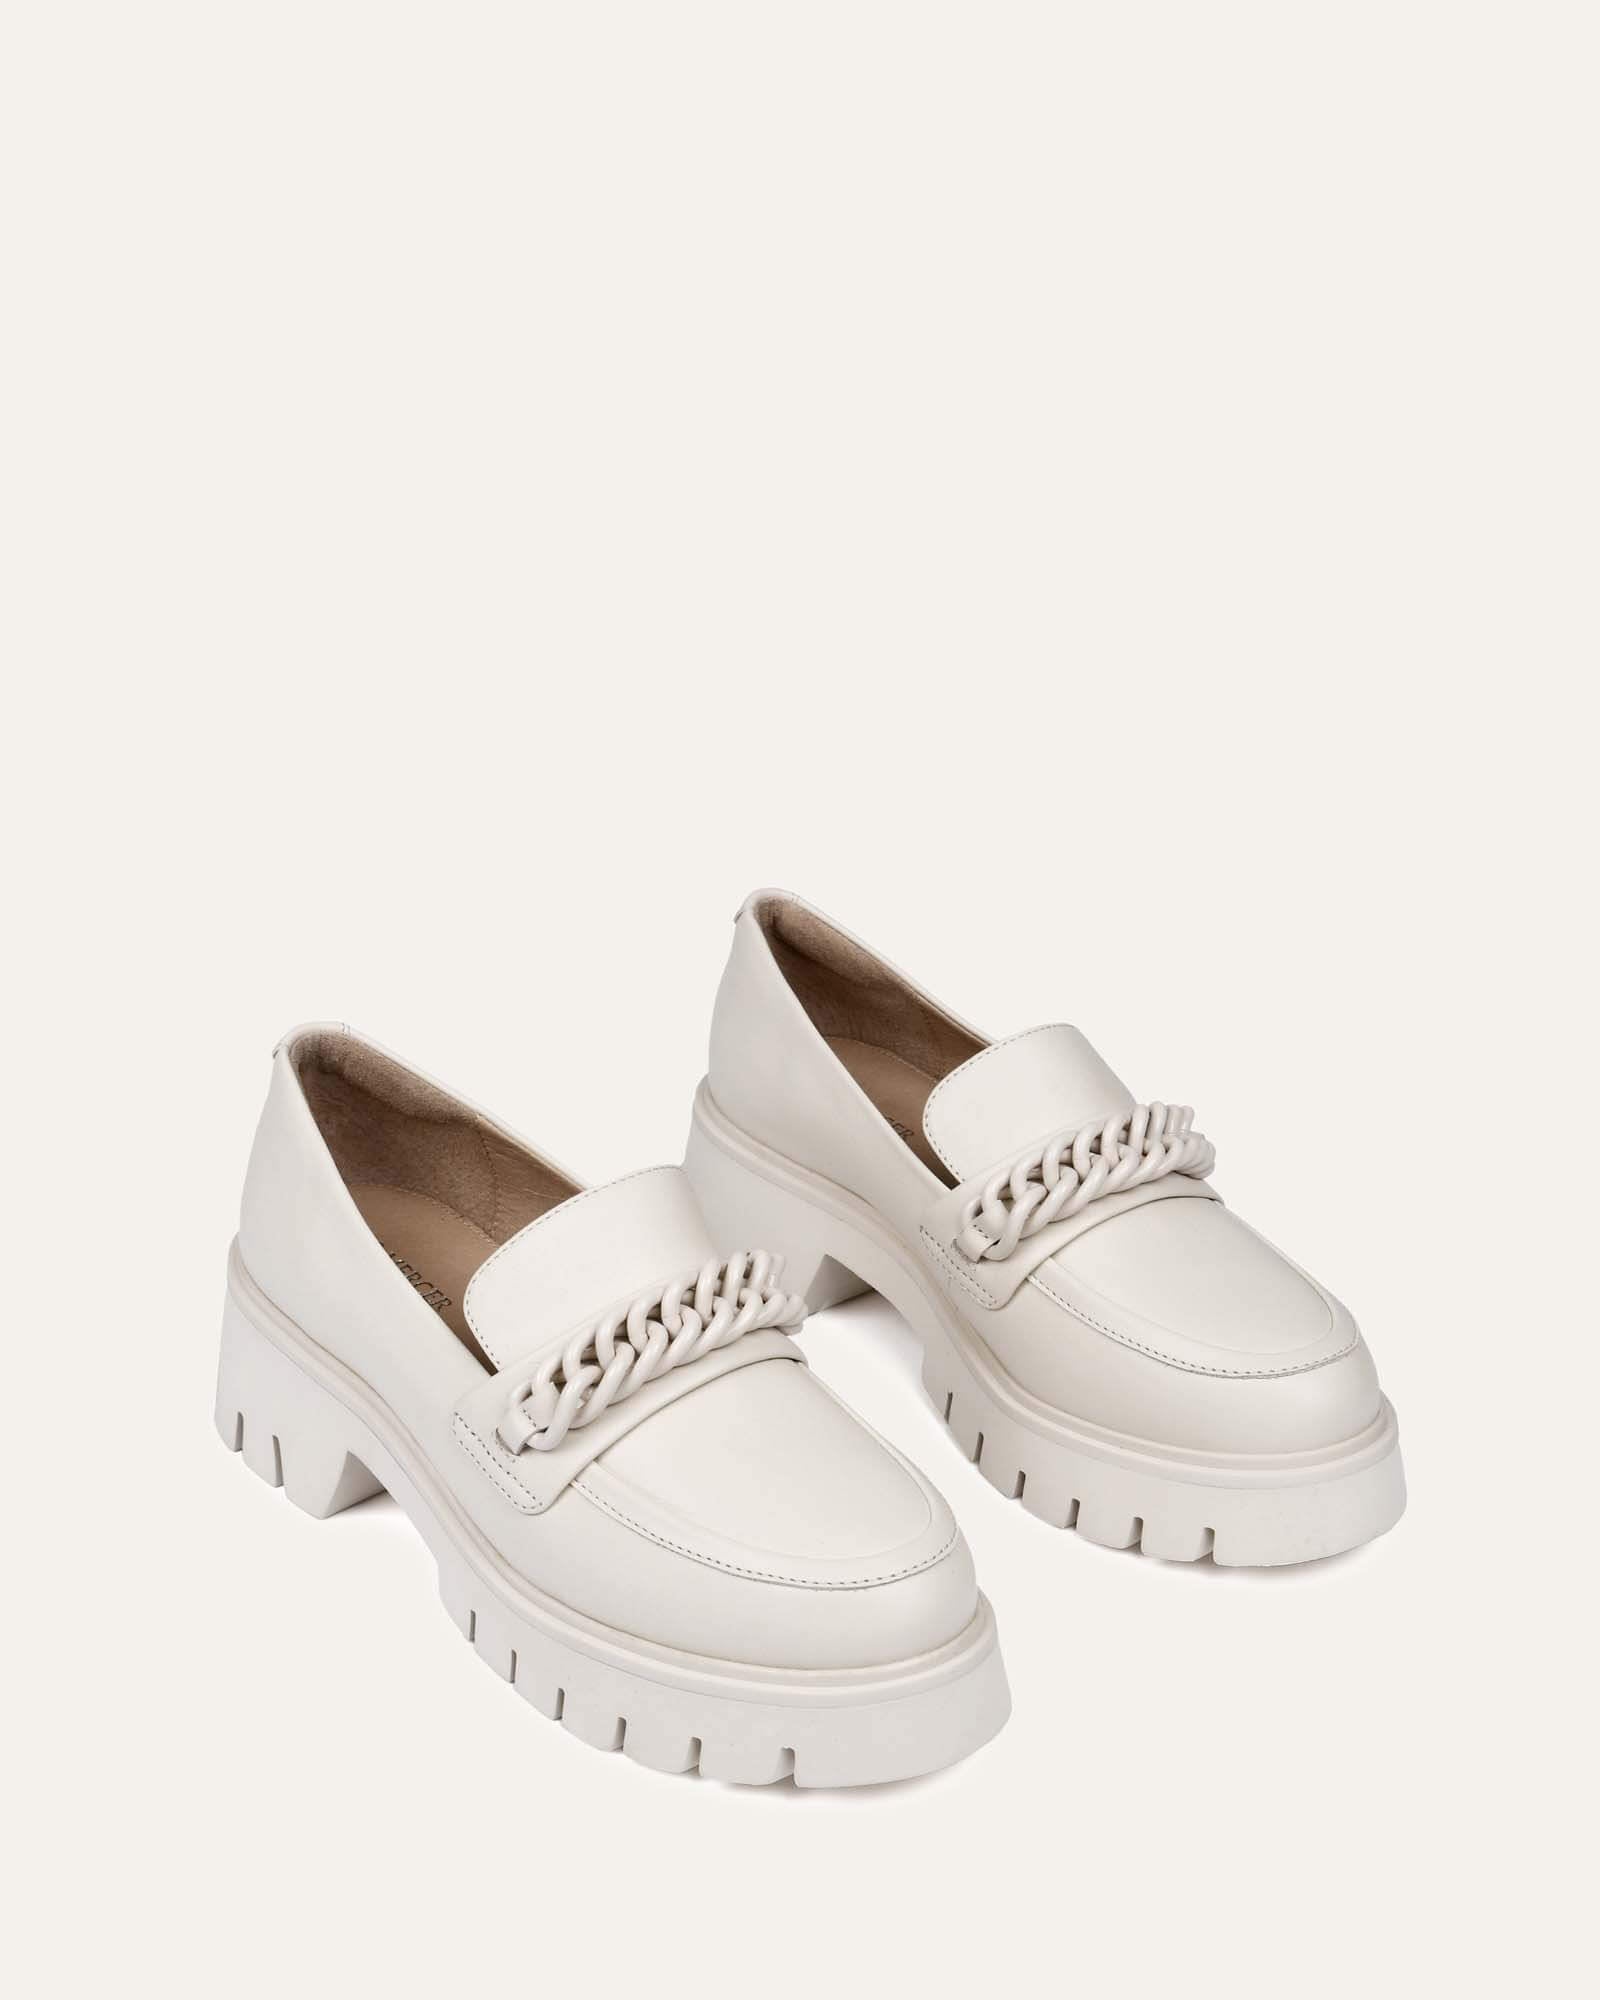 BRODIE LOAFERS OFF WHITE LEATHER - Jo Mercer